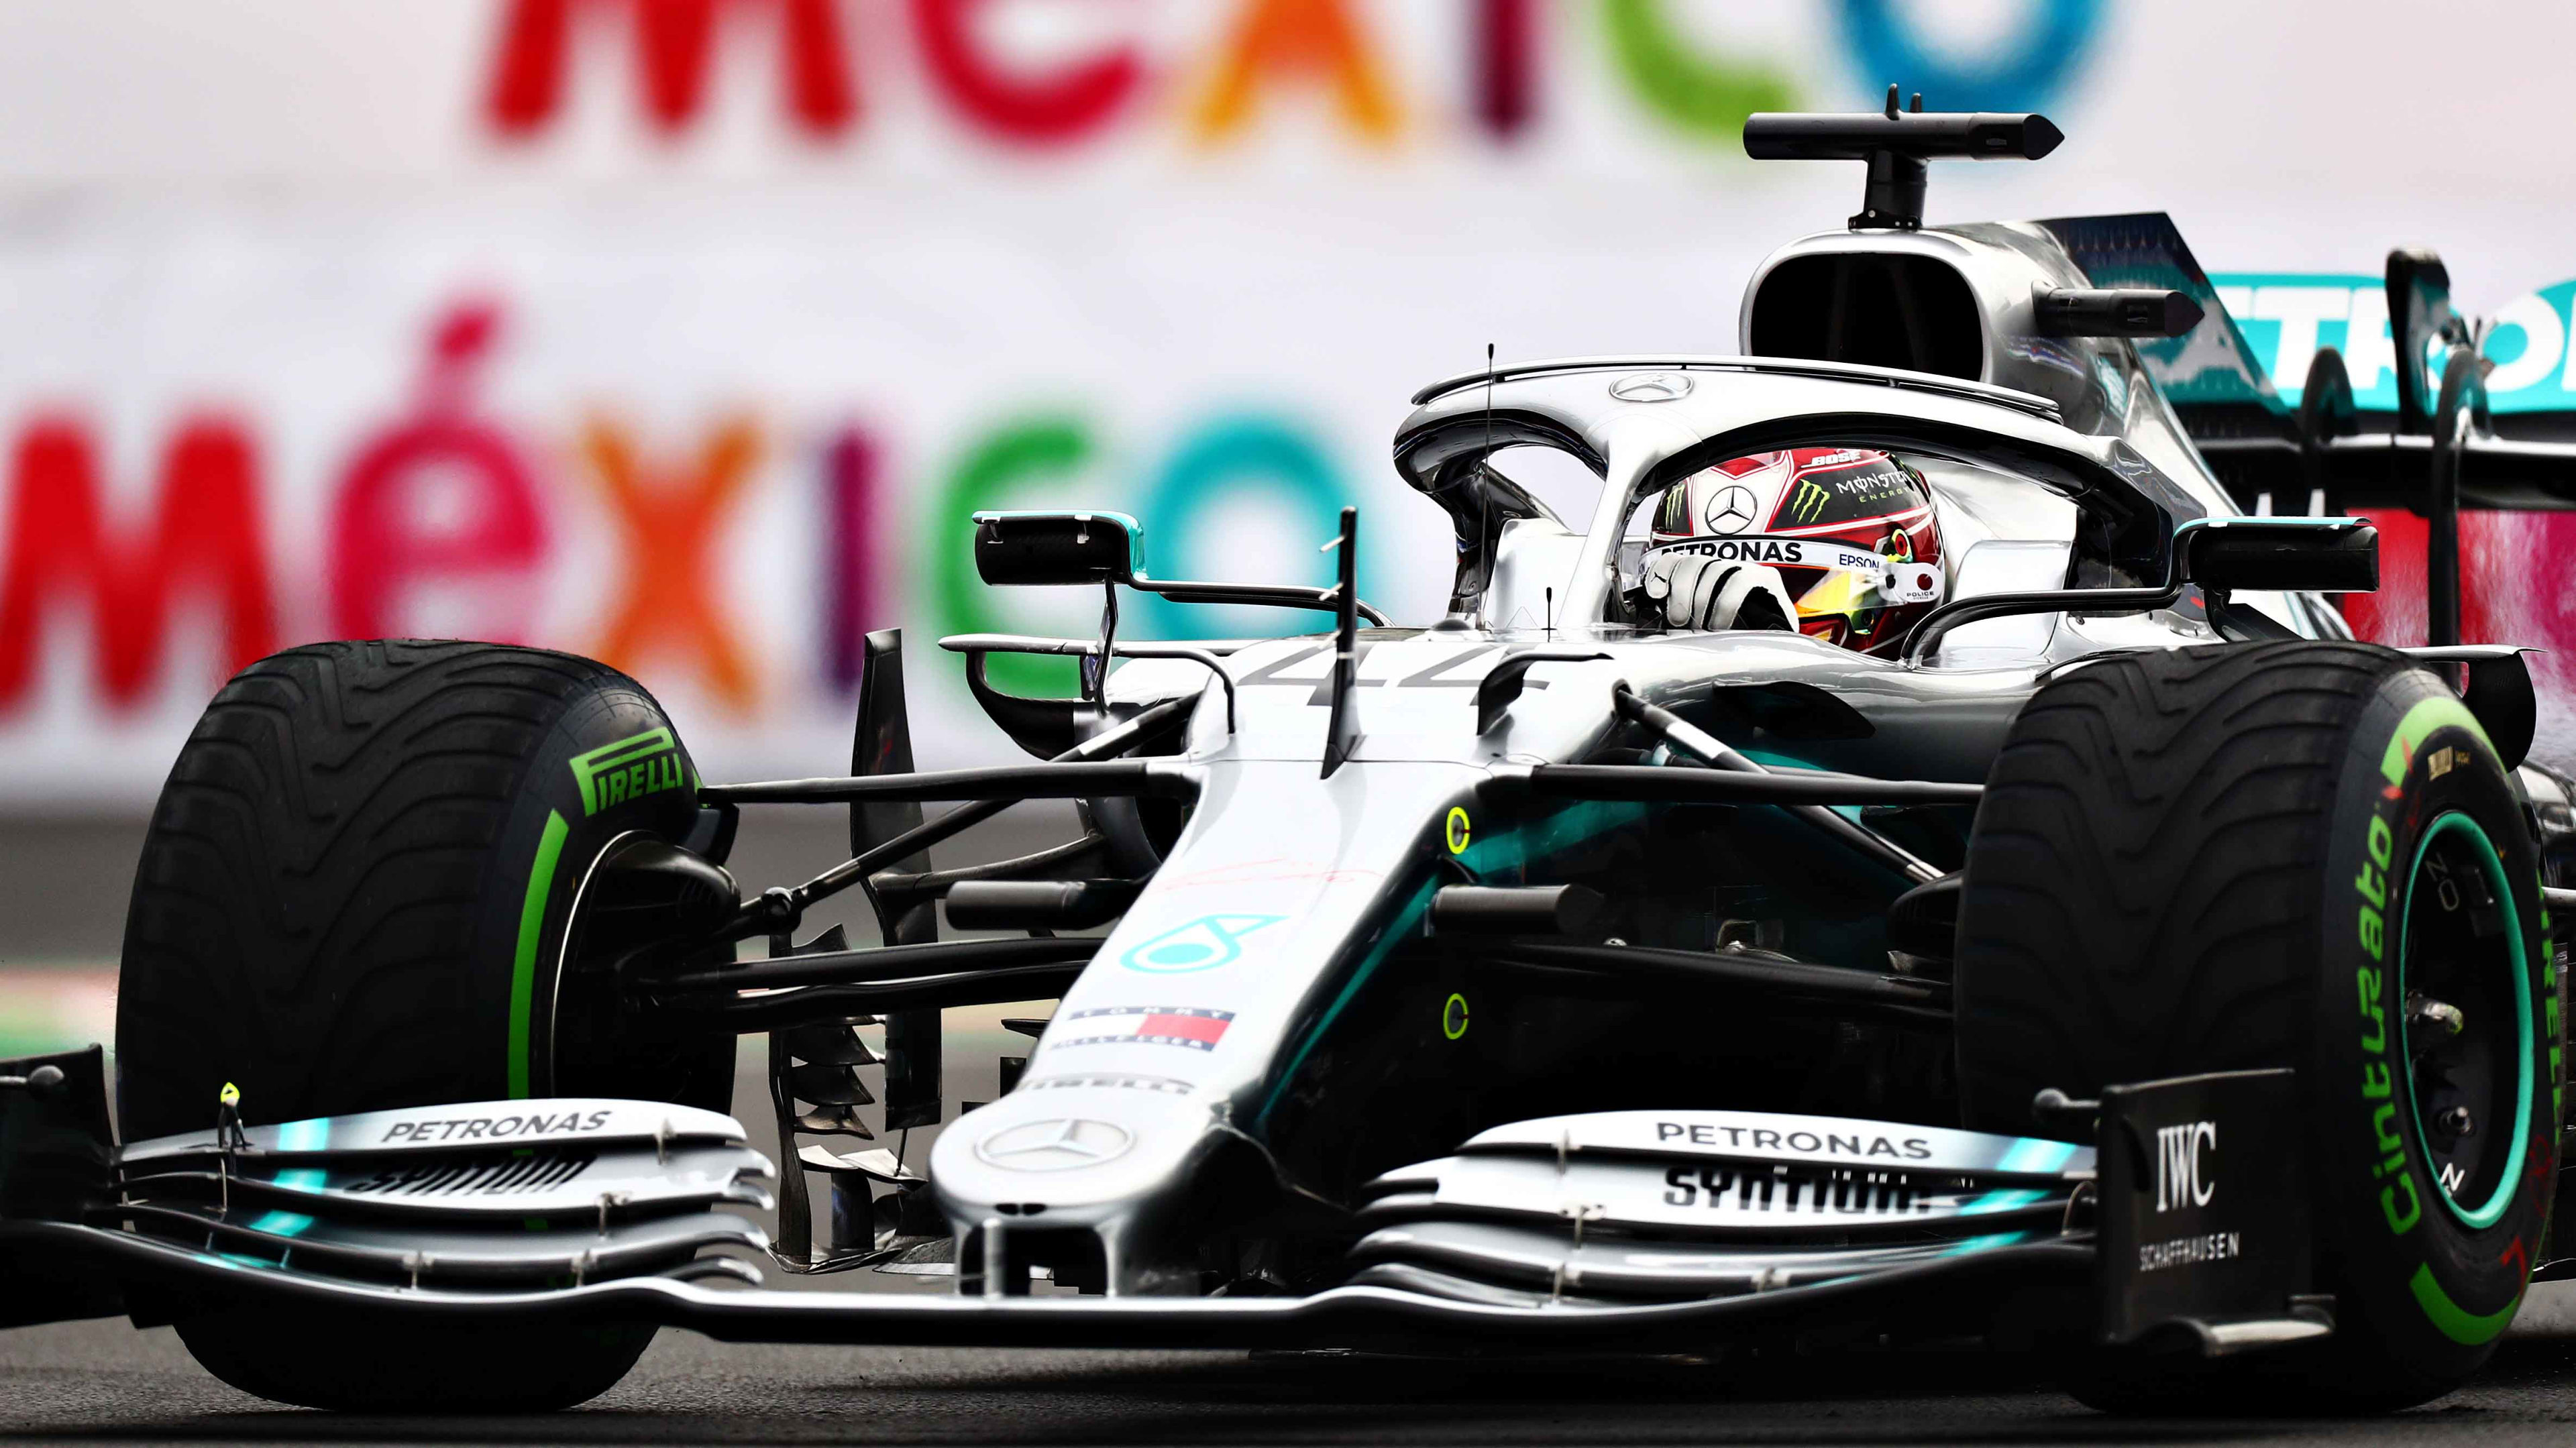 2019 Mexican Grand Prix FP1 Hamilton closely followed by Leclerc and Verstappen in first Mexico GP practice session Formula 1®